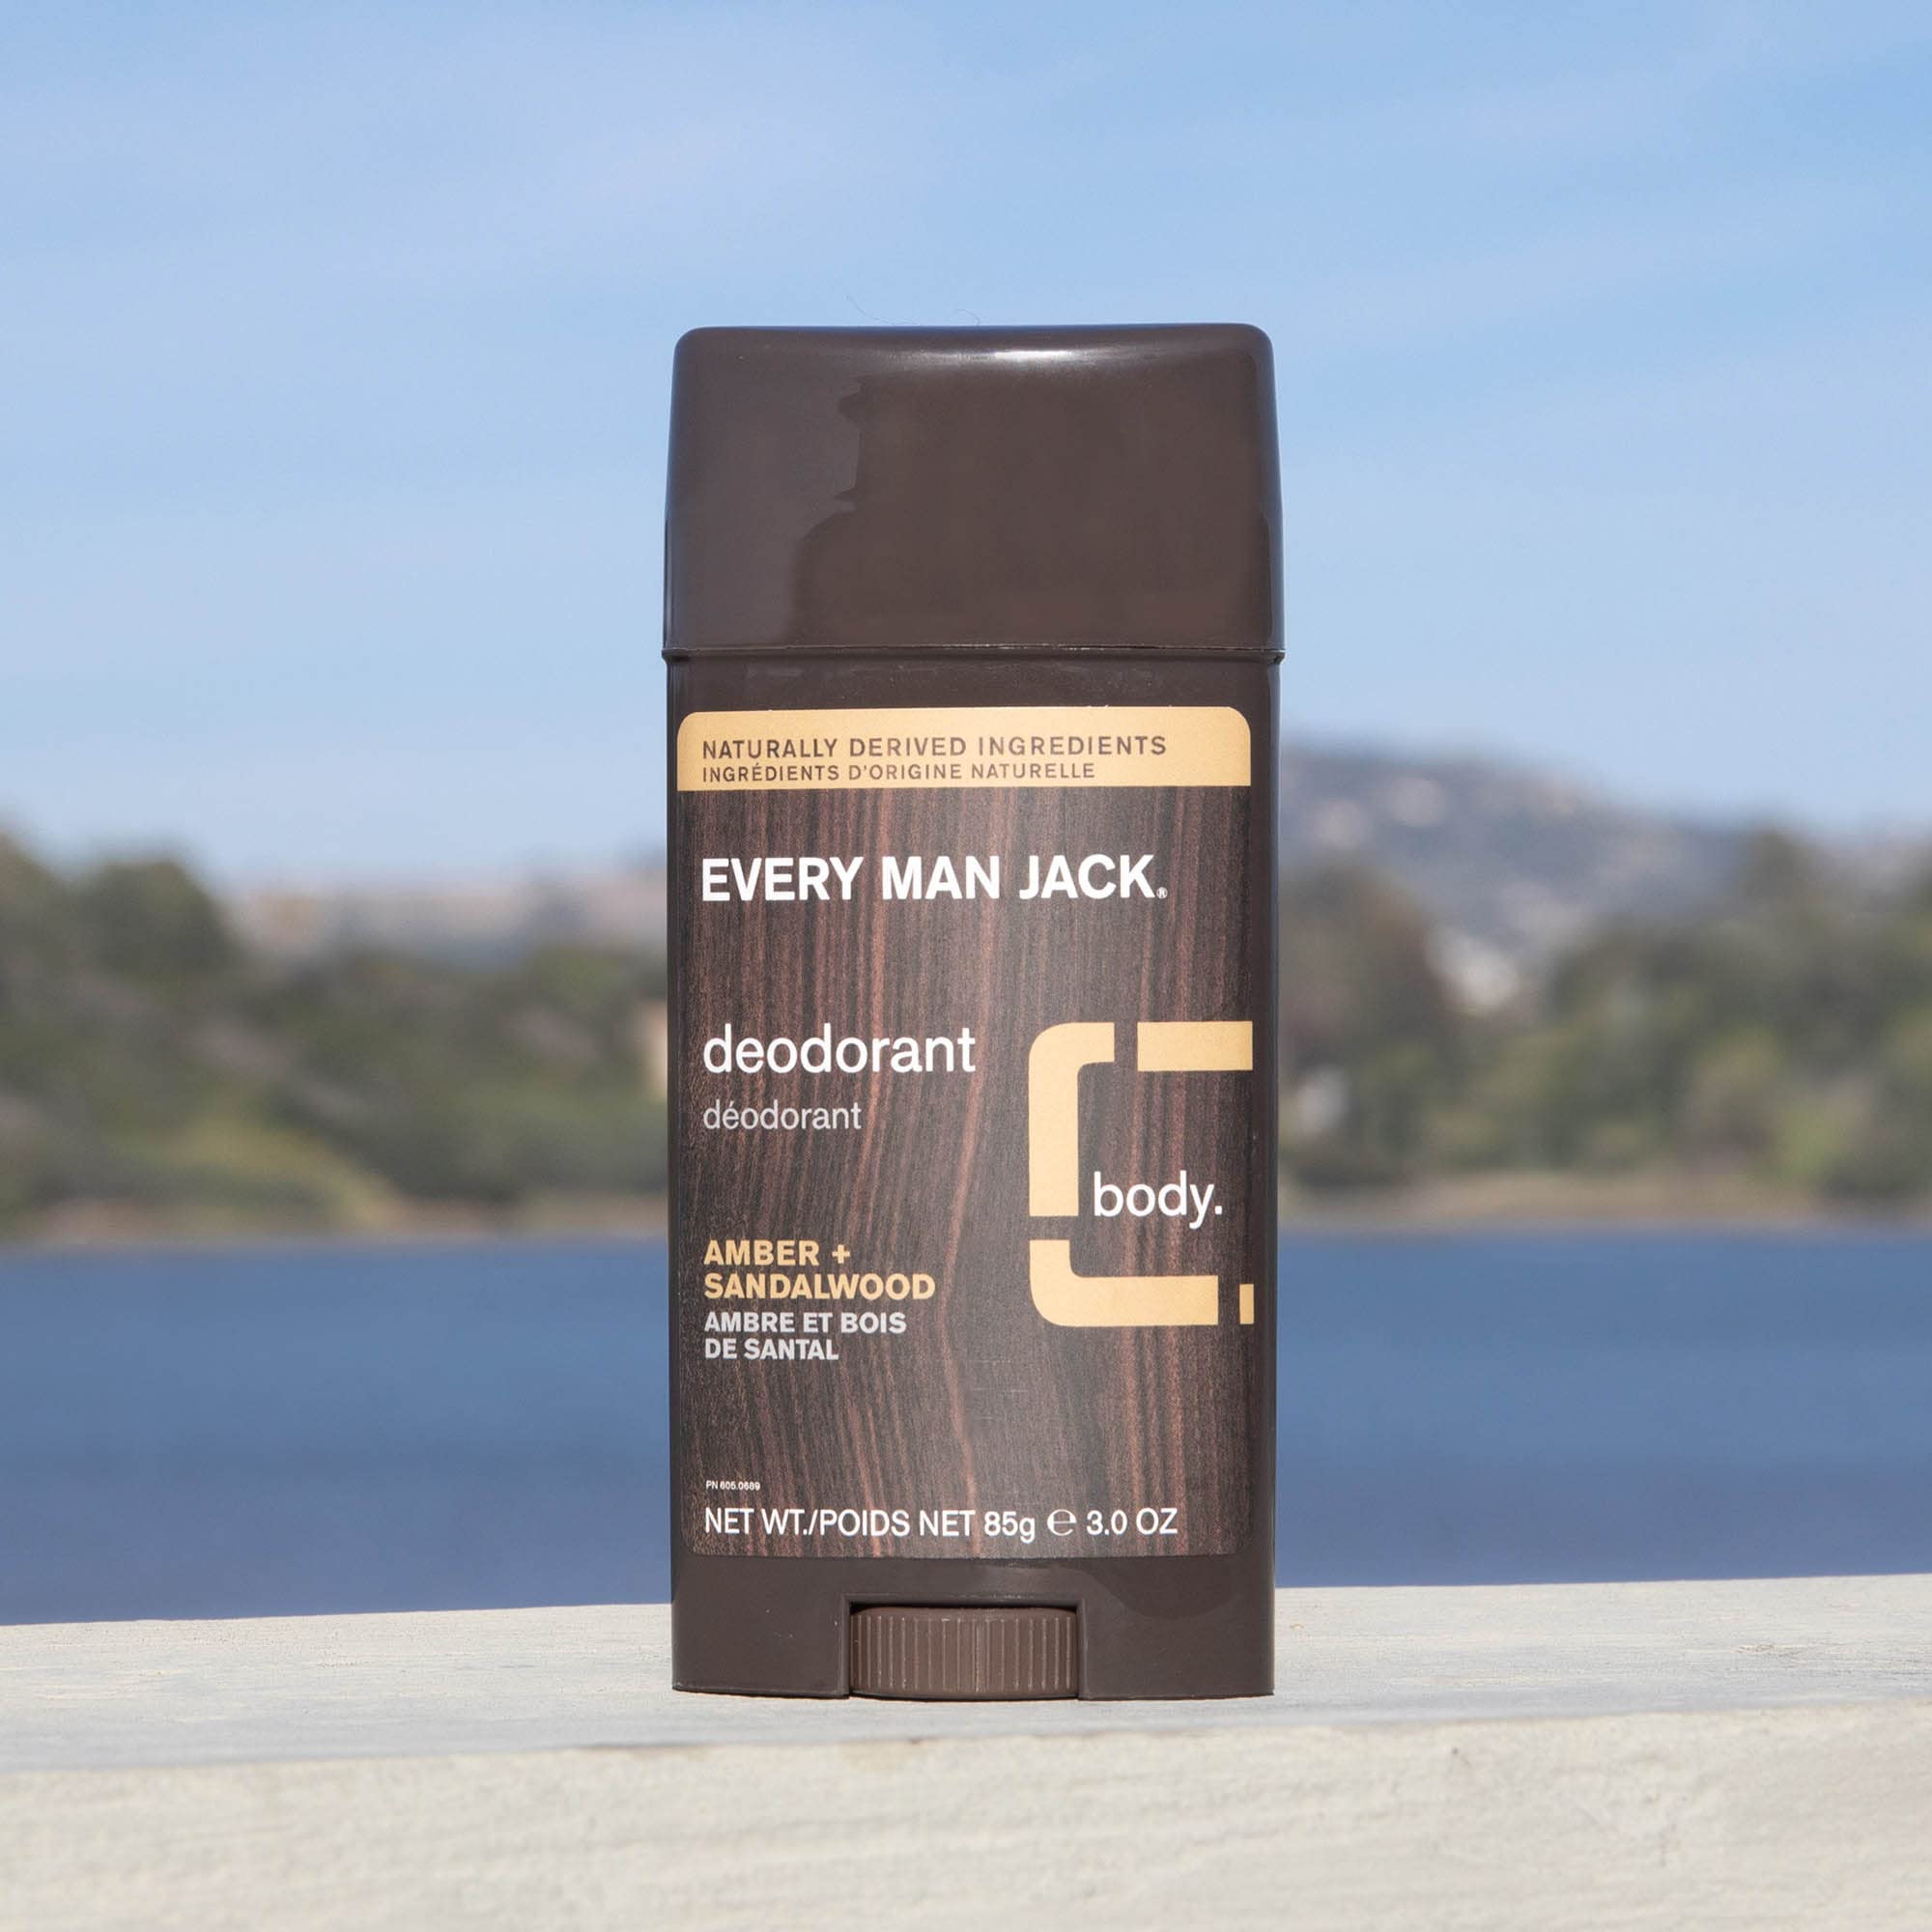 Every Man Jack Men’s All Over Wash + Deodorant Set - Cleanse All Skin Types and Fight Odors with Naturally Derived Ingredients and Amber + Sandalwood Scent - All Over Wash Twin Pack + Deo Twin Pack